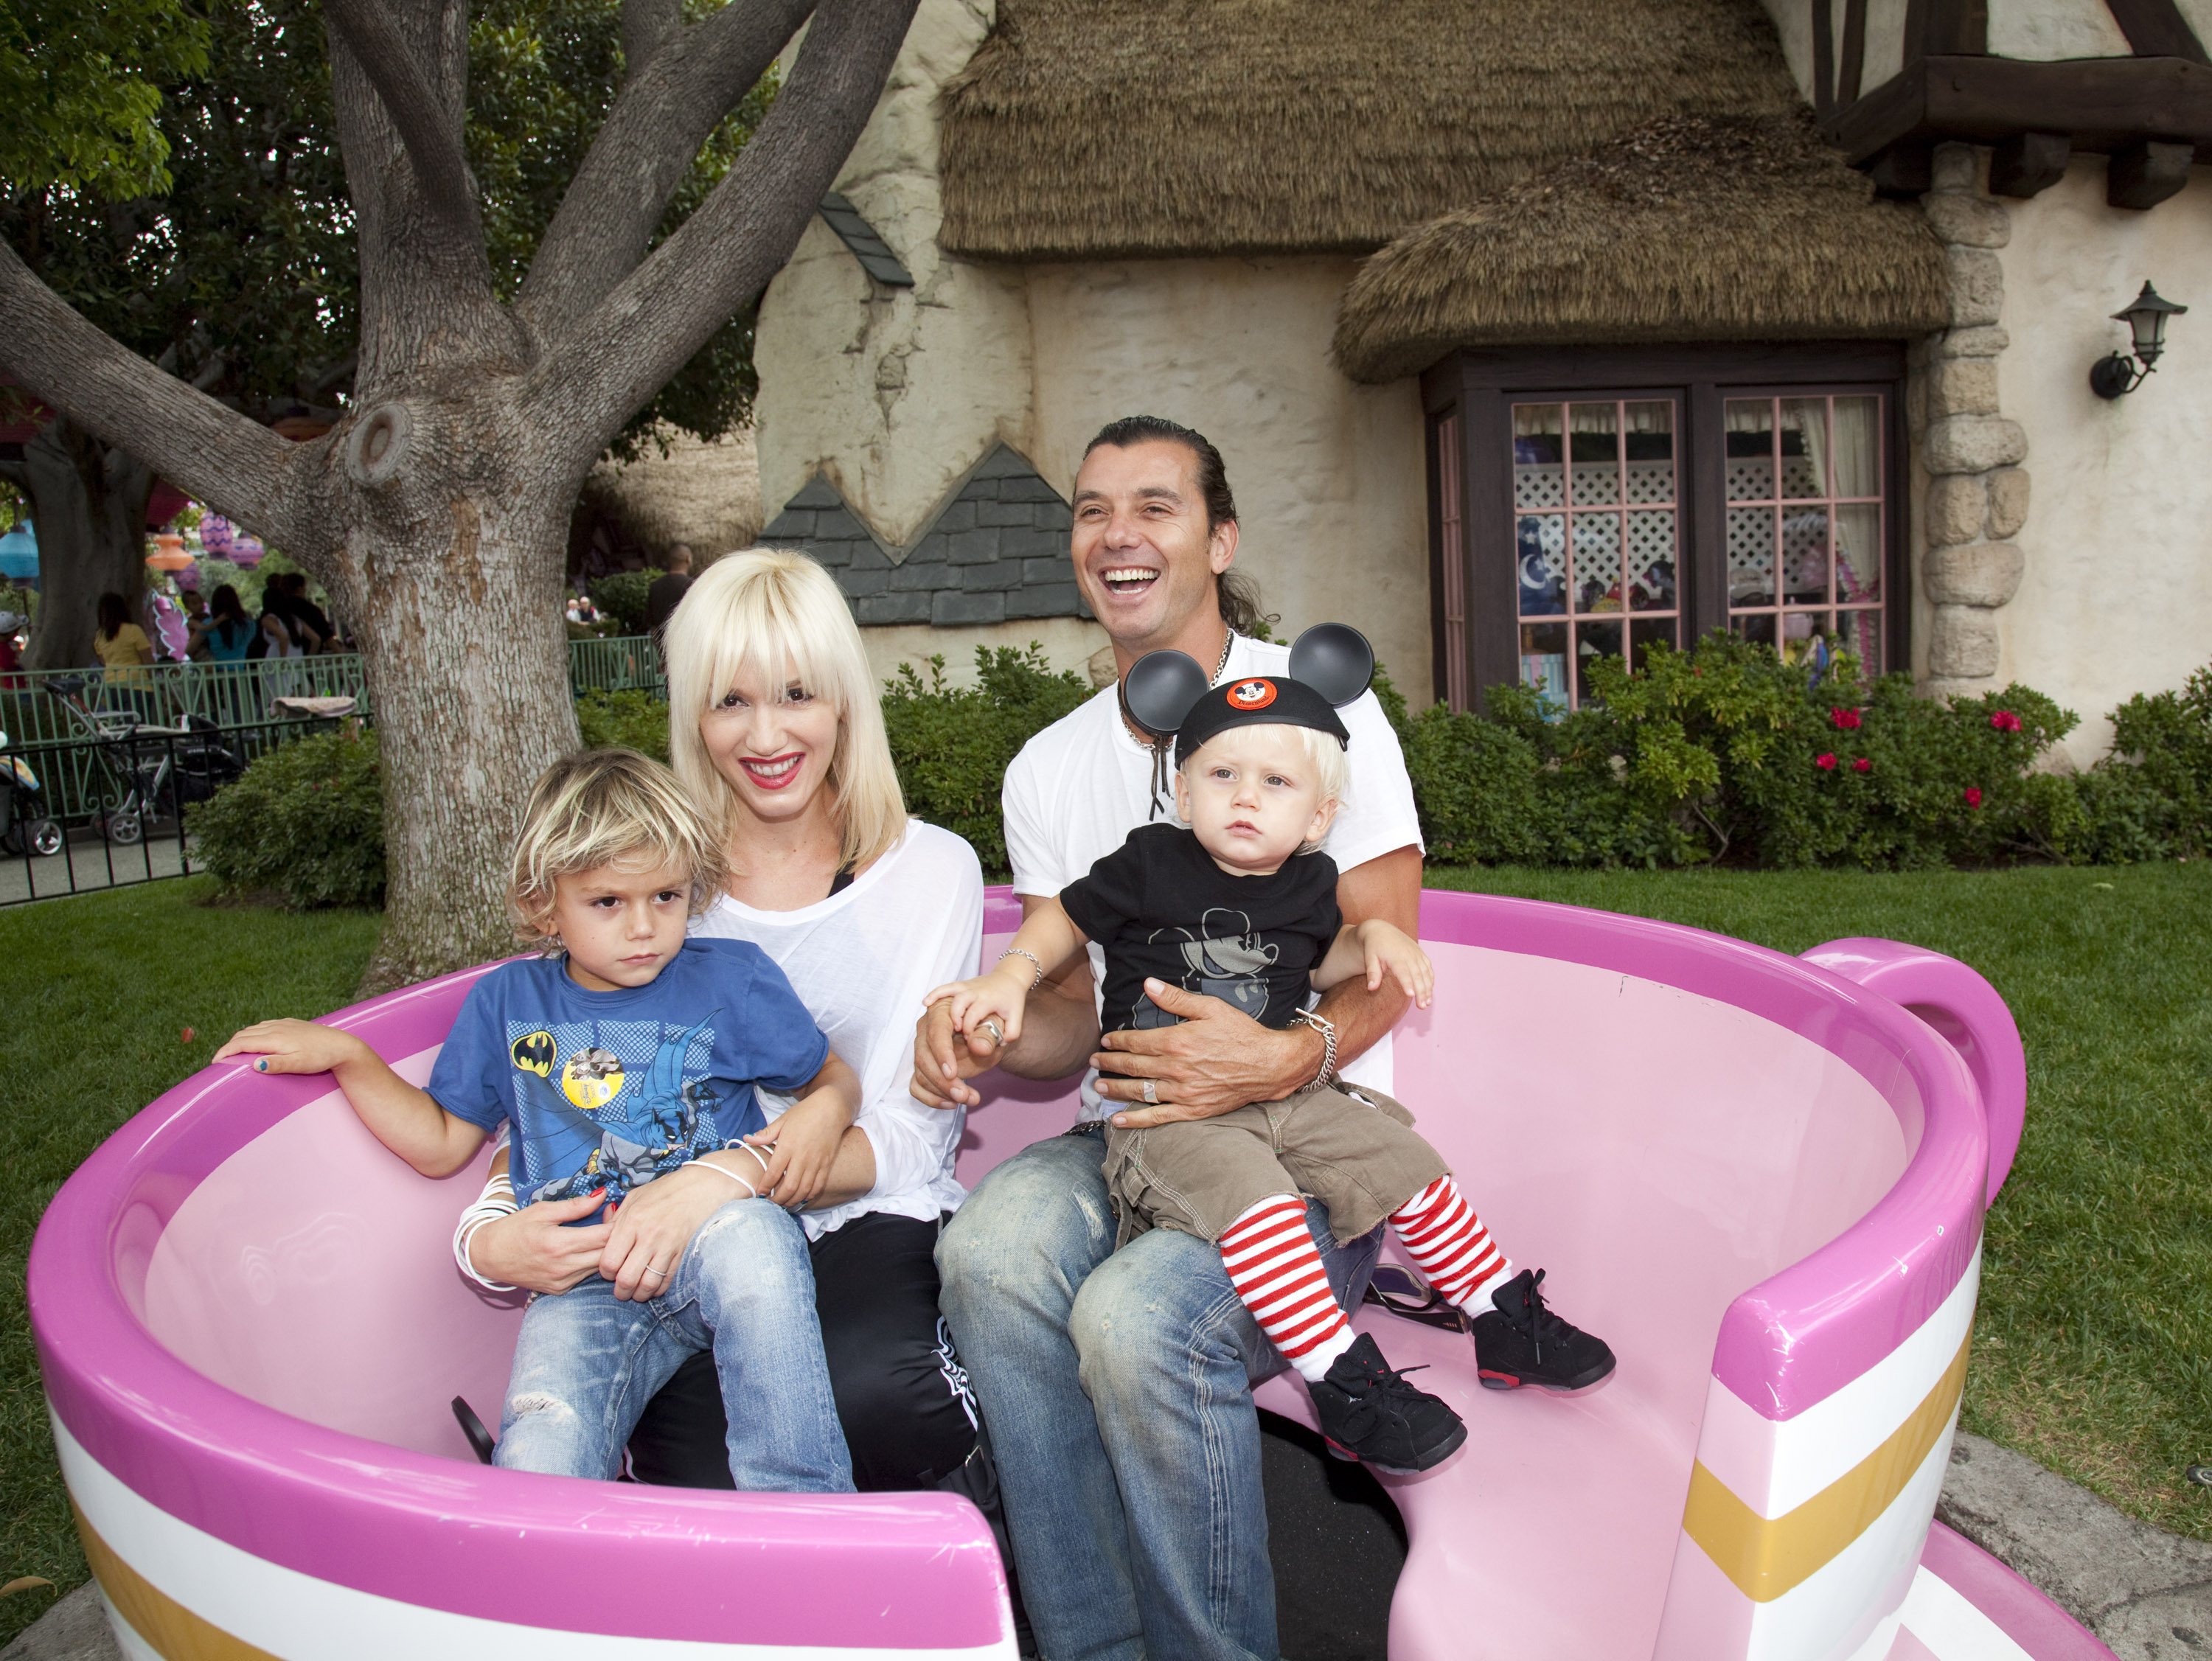 Gwen Stefani and Gavin Rossdale, with their children Kingston, 4, and Zuma, 1, at the Mad Tea Party attraction at Disneyland on July 7, 2010, in Anaheim, California | Source: Getty Images